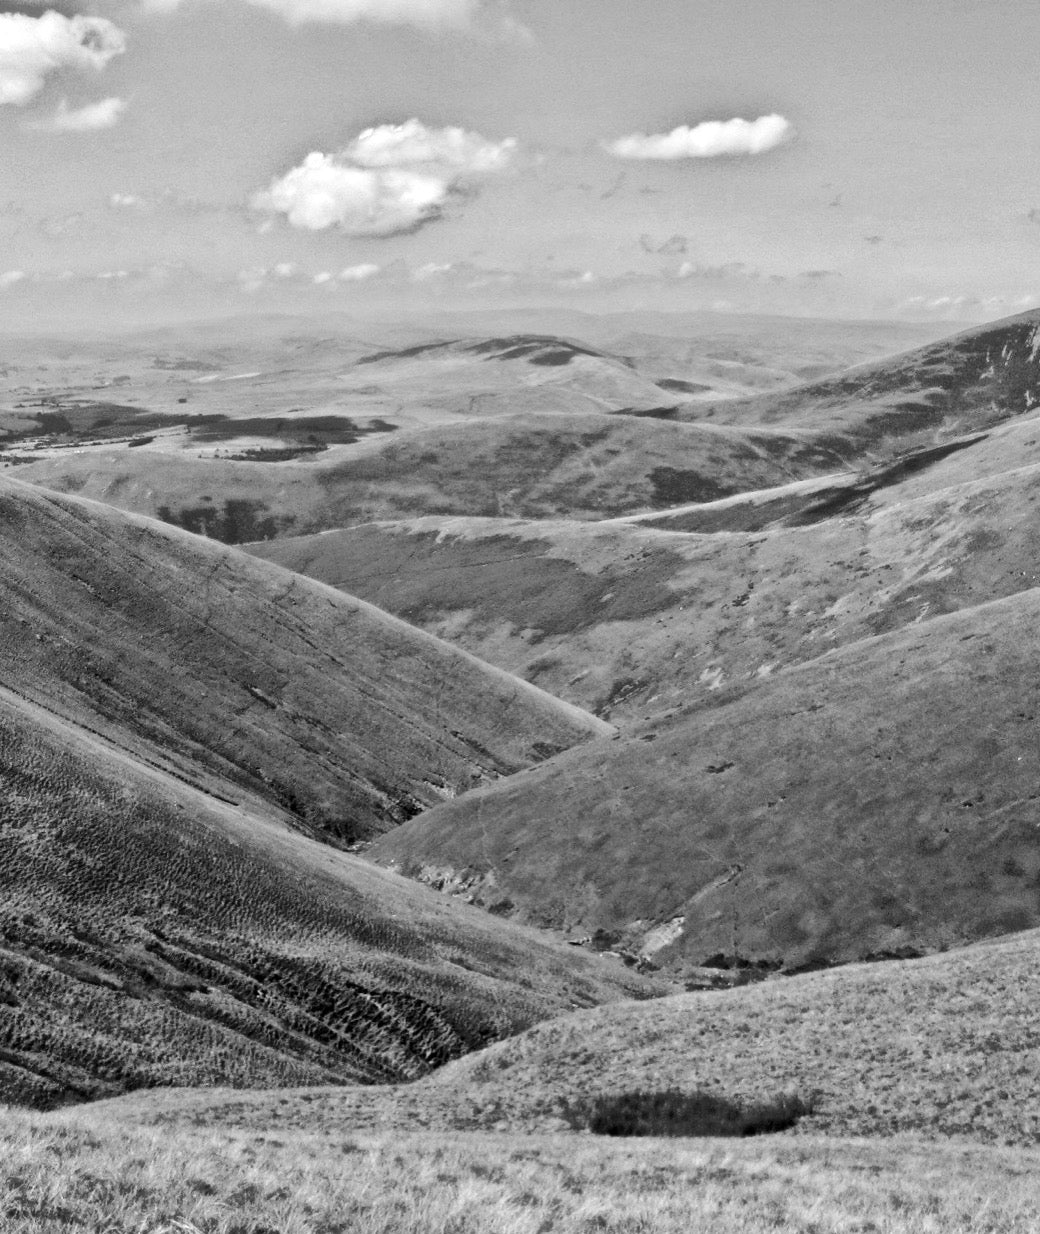 Walking on the howgills - best walks in the Yorkshire Dales